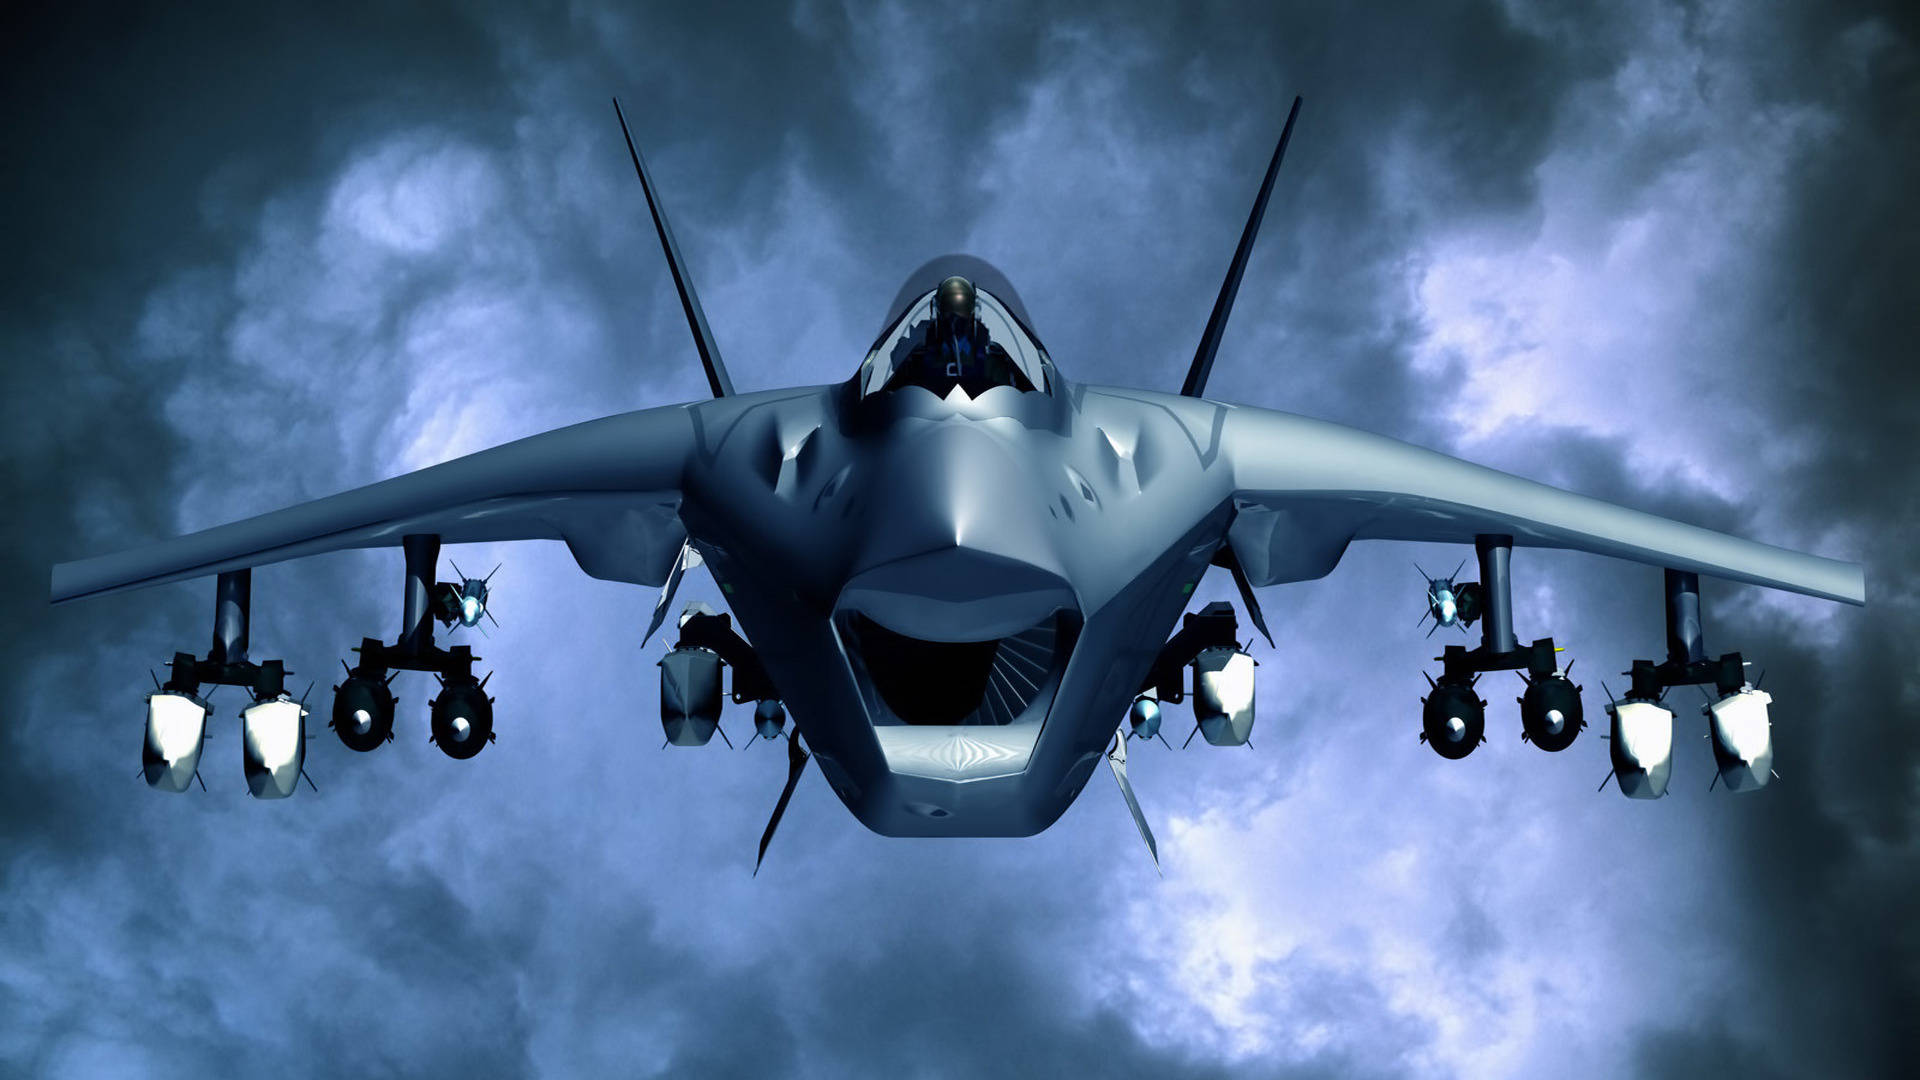 The United States Air Force Leads the Way With Its Military Jet Superpower Wallpaper